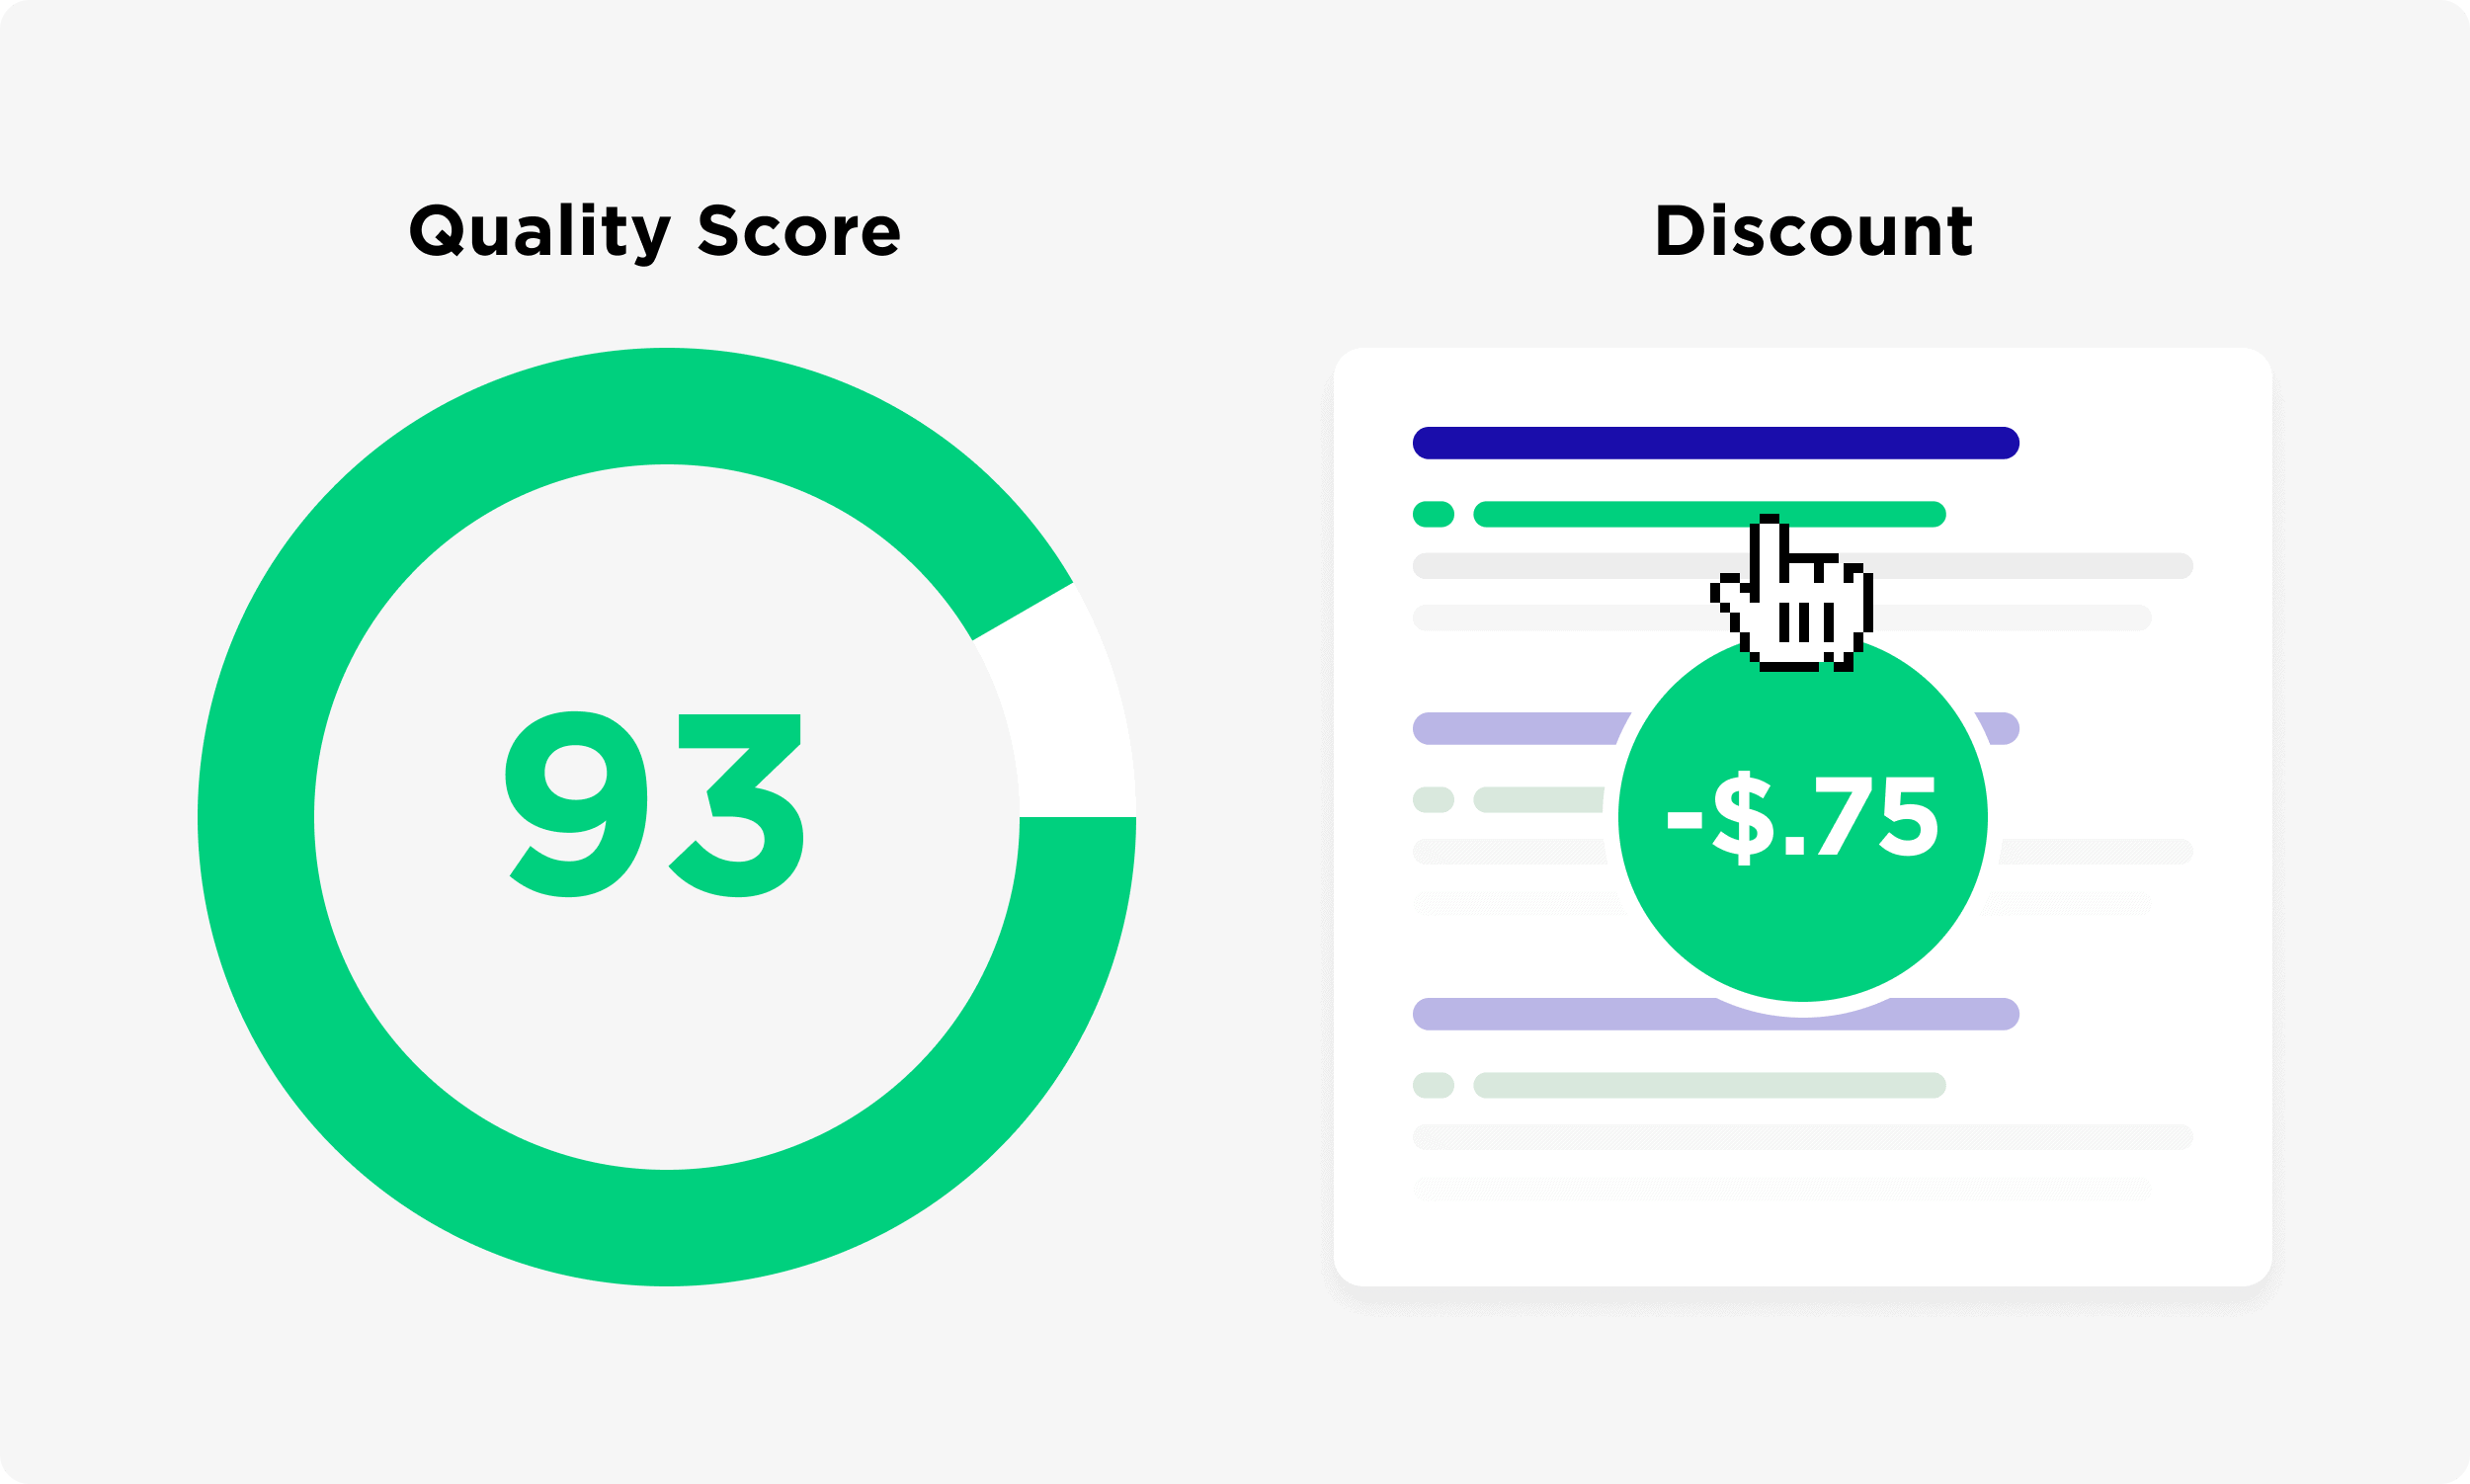 High Quality Score Means You Will Get A Discount For Each Click